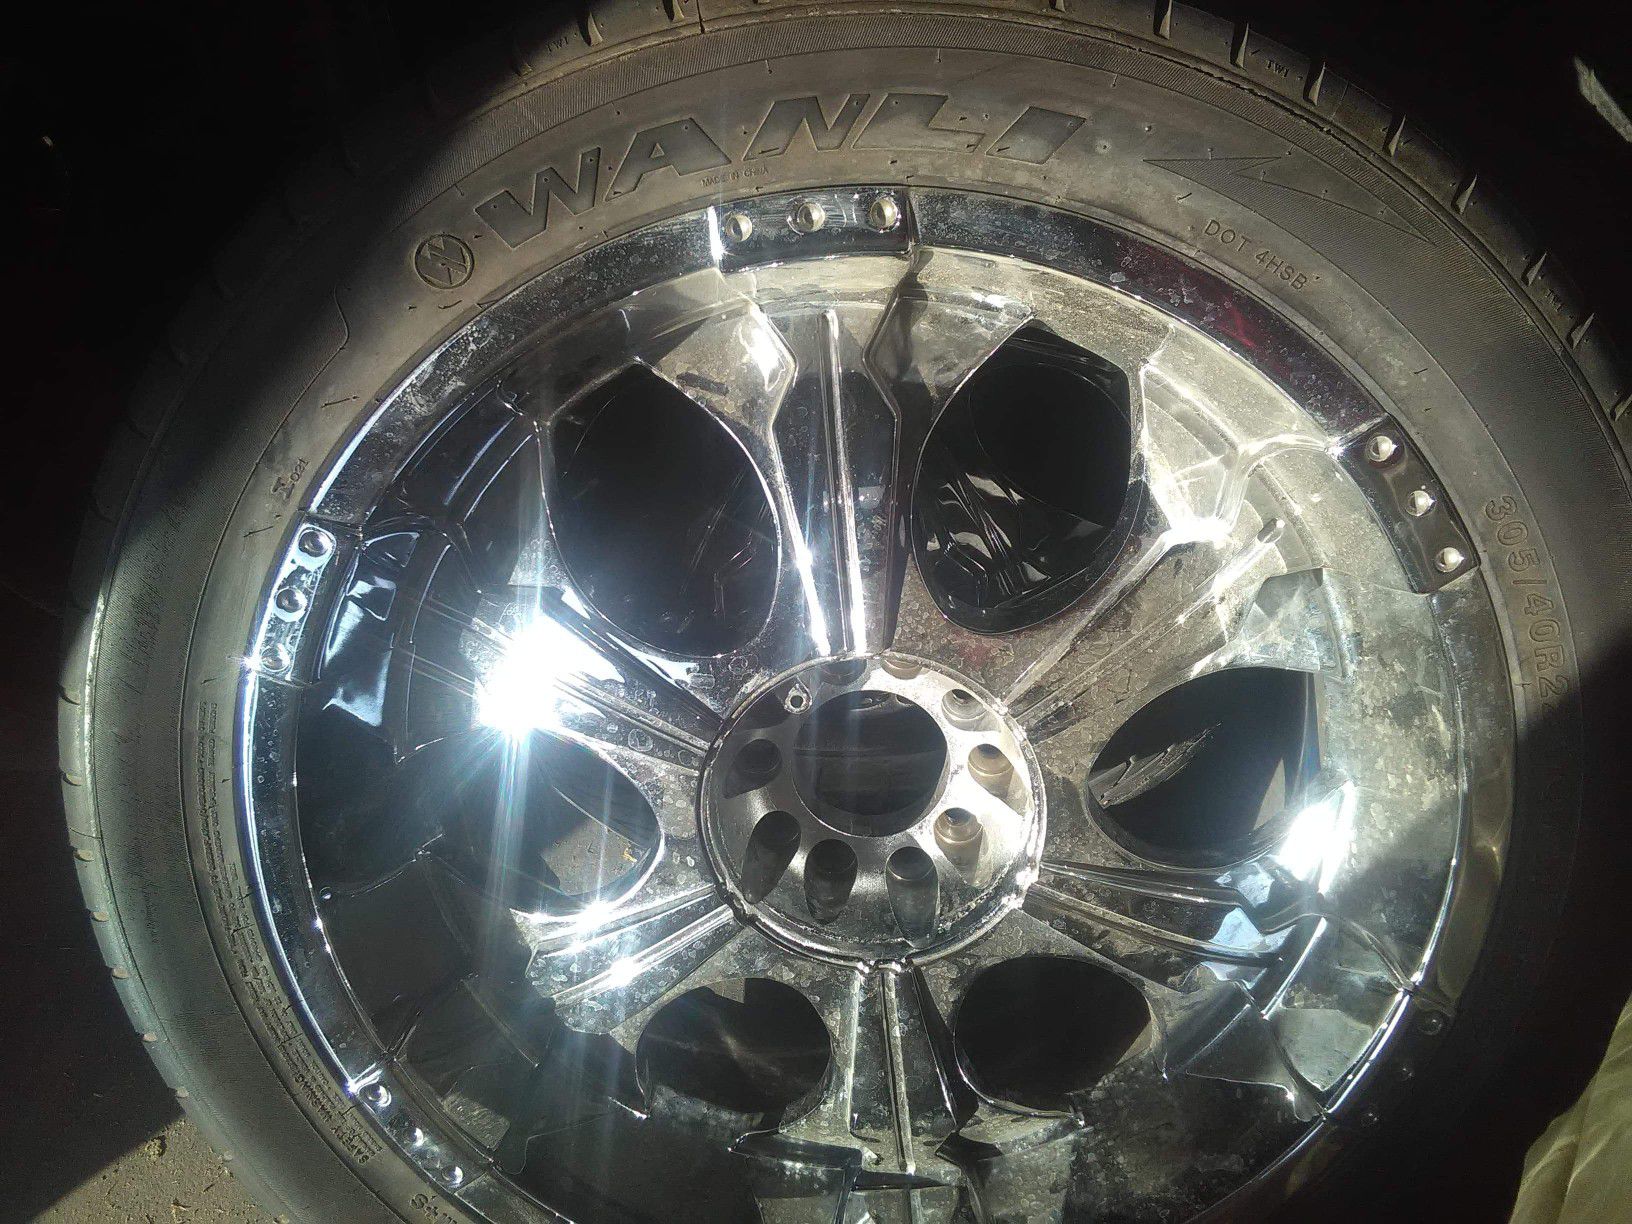 Universal chevy / ford rims